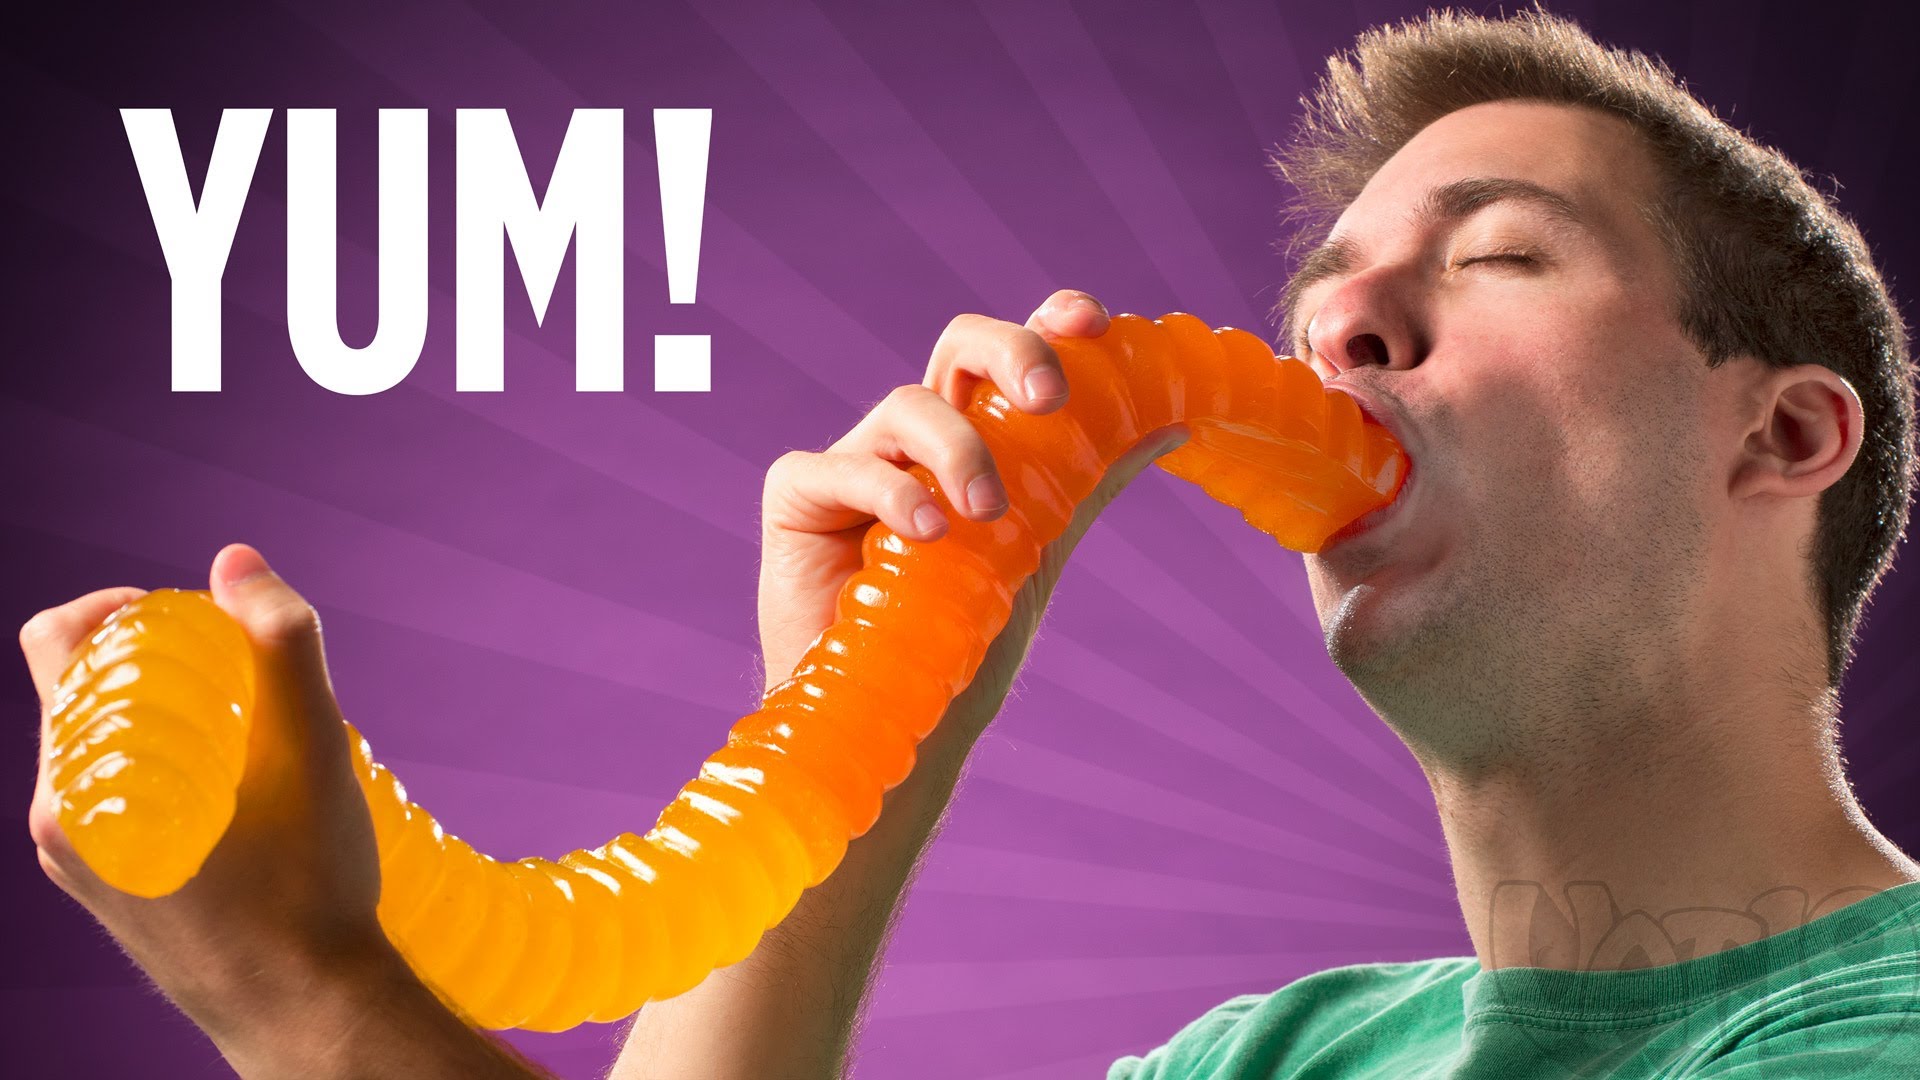 Vat19 is featuring The World's Largest Gummy Worm, which is 128 times ...